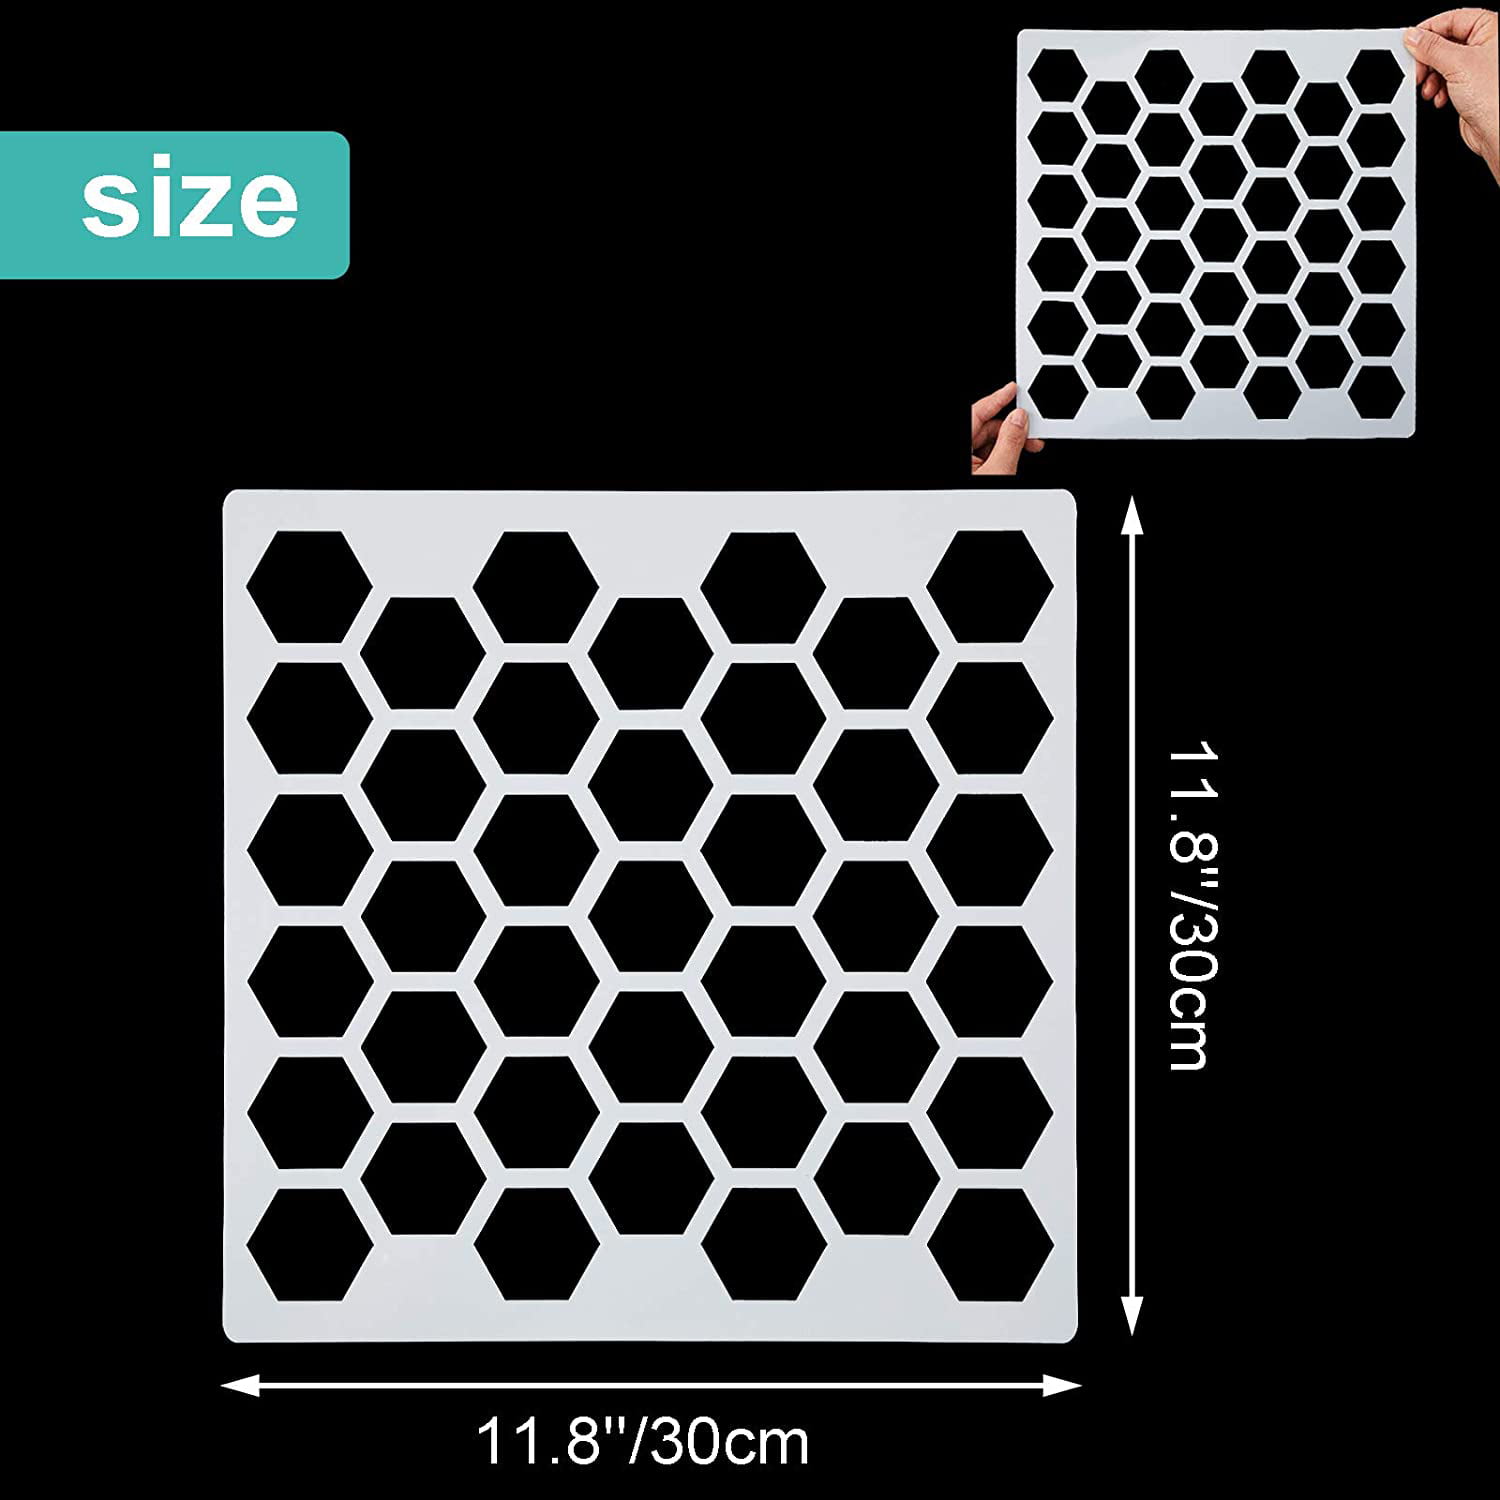 12 Sets Geometric Honeycomb Stencils Painting Art Templates Stencils for Scrapbooking Drawing Tracing DIY Furniture Wall Floor Decor 11.8 x 11.8 Inch 